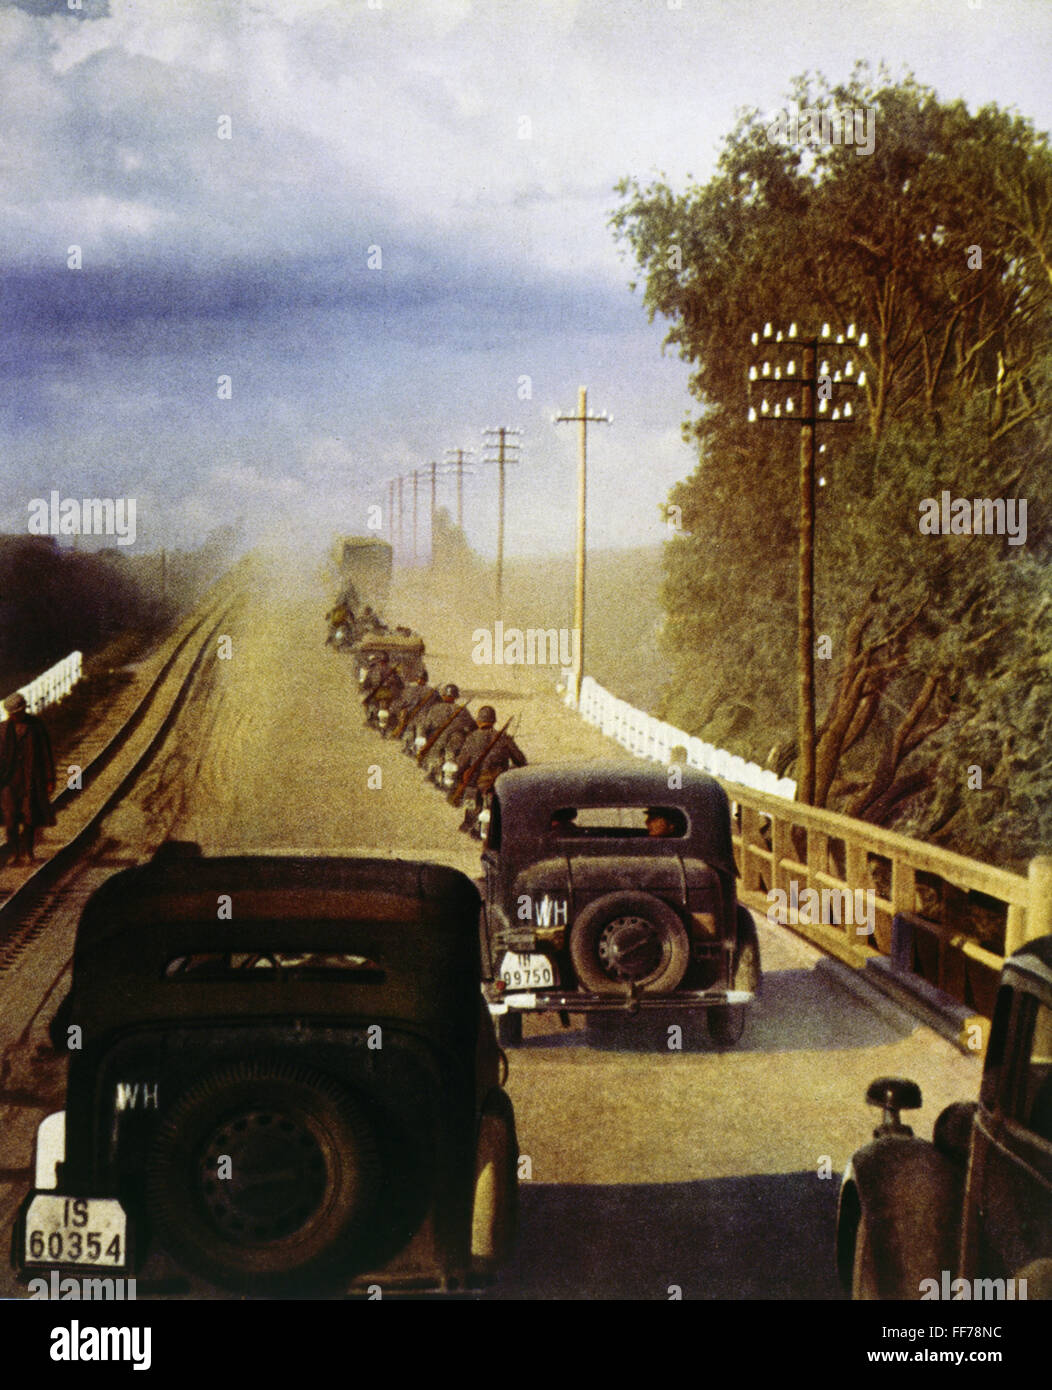 events, Second World War / WWII, Russia 1941, convoy of Wehrmacht vehicles on the Eastern Front, 1941 or 1942, car, cars, motorcycles, motorcycle, vehicle, vehicles, road, Soviet Union, USSR, 20th century, historic, historical, Third Reich, military, people, 1940s, Additional-Rights-Clearences-Not Available Stock Photo